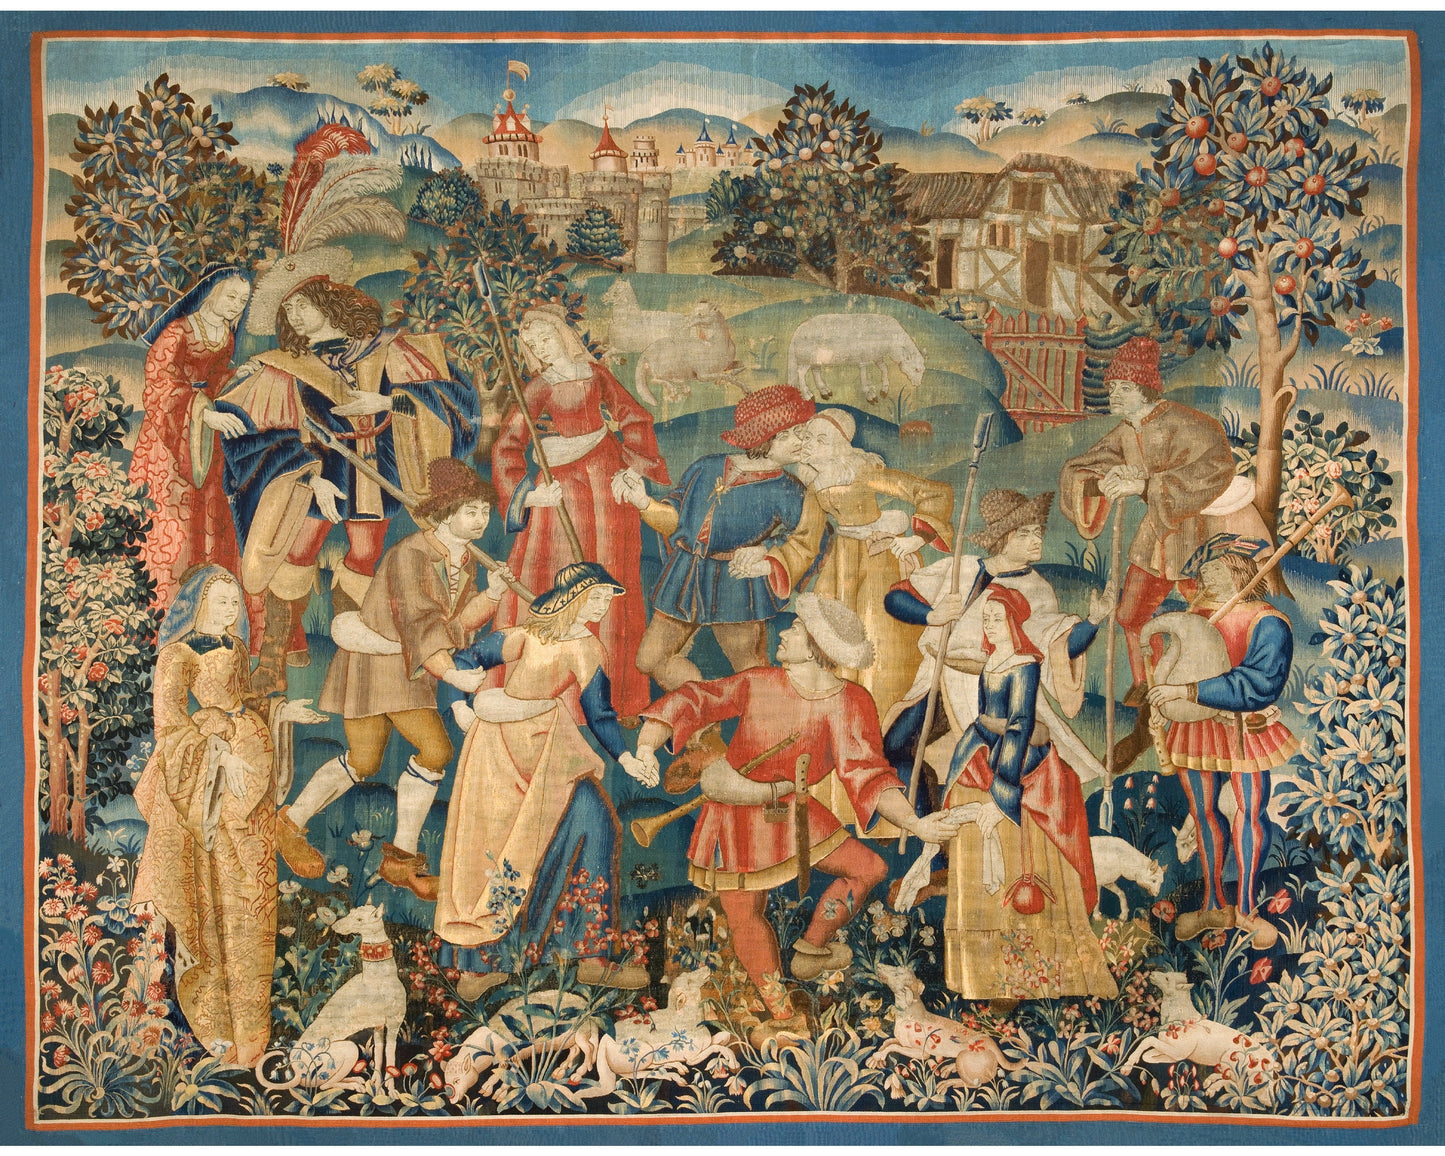 Pastoral dance art print | Shepherds in round dance | Medieval tapestry art | Pastoral scene with dog, sheep, castle | 16th century textile